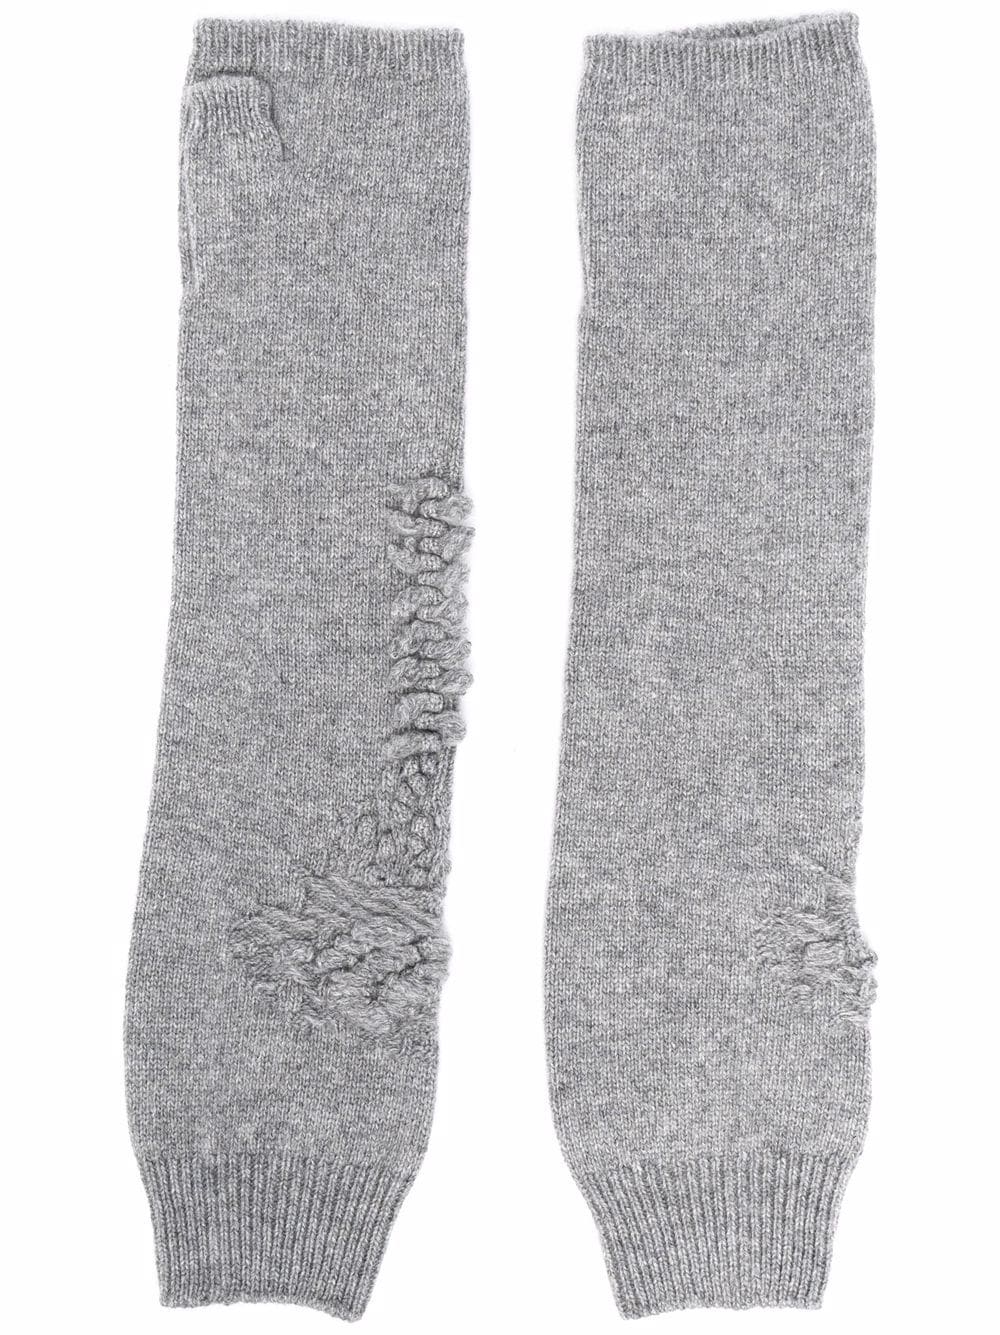 Barrie cashmere mittens